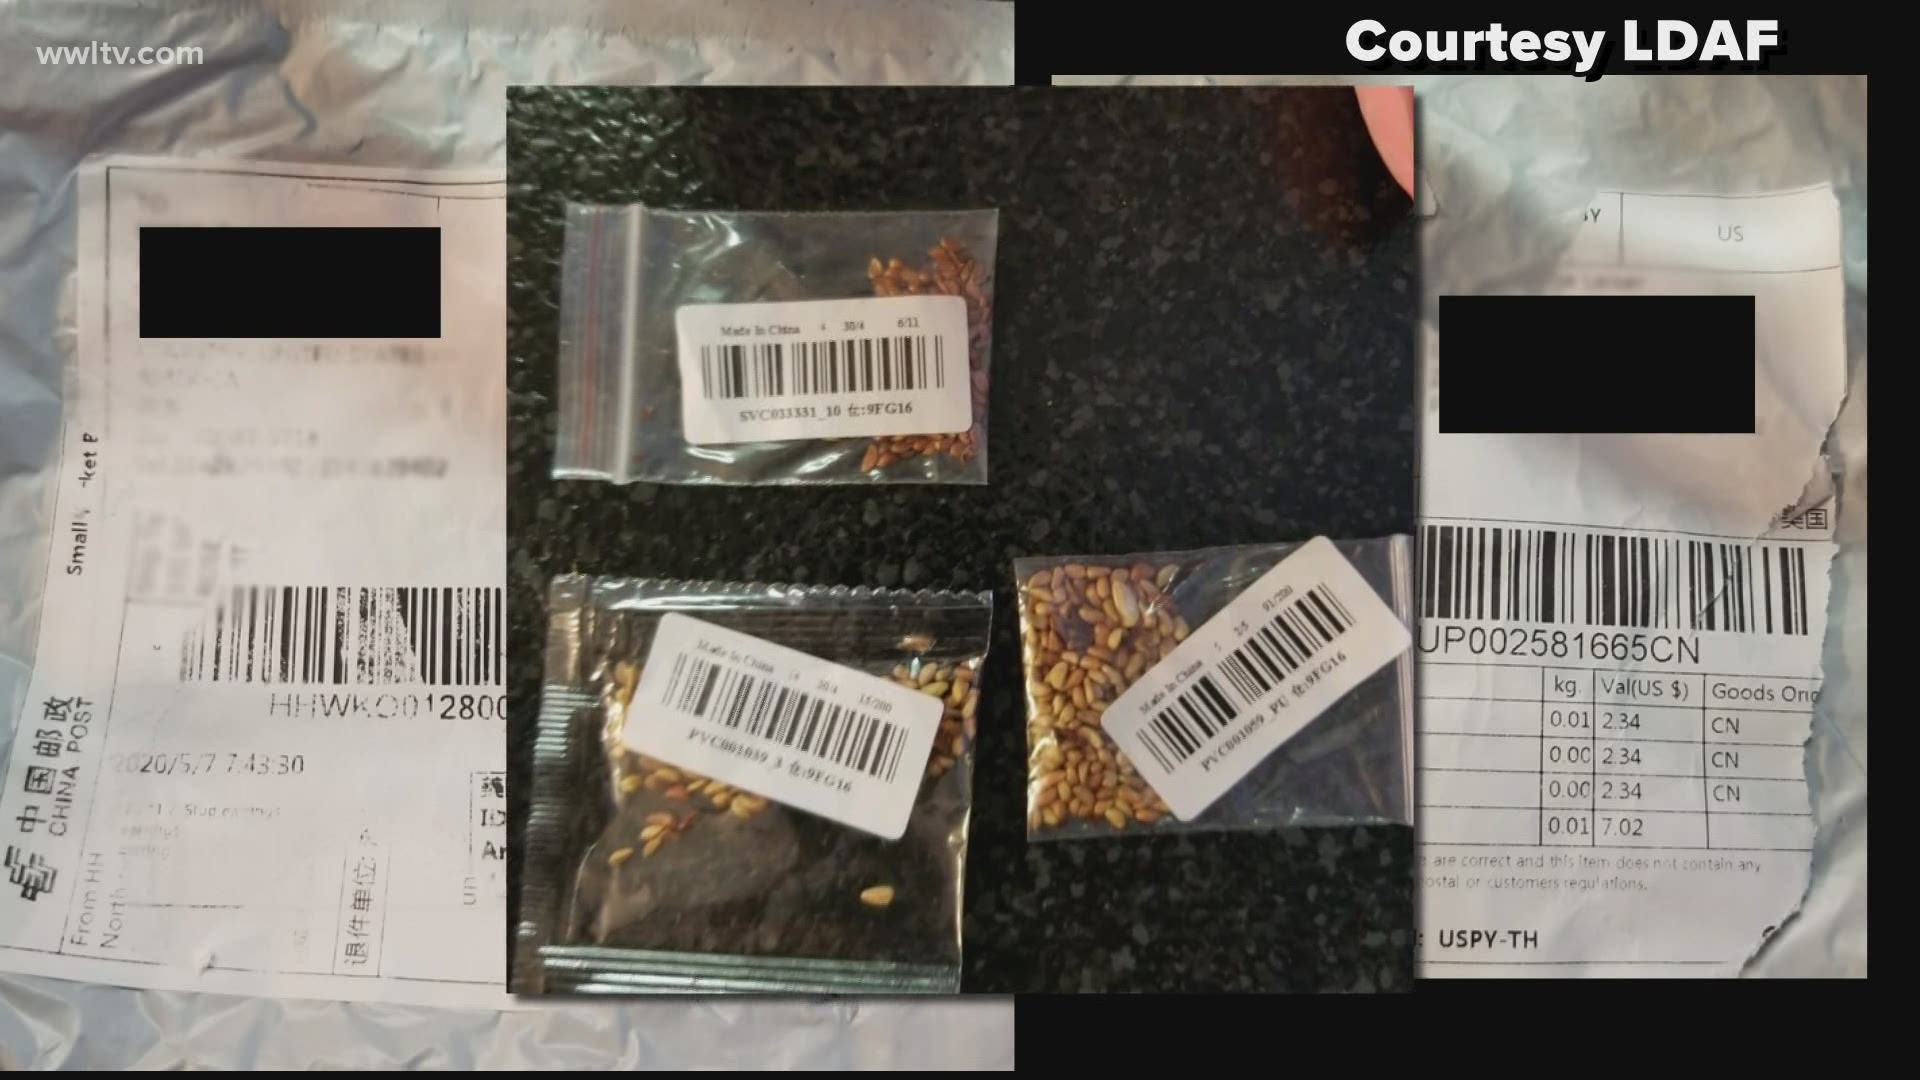 Mystery seeds from China appear in some Louisiana residents' mail